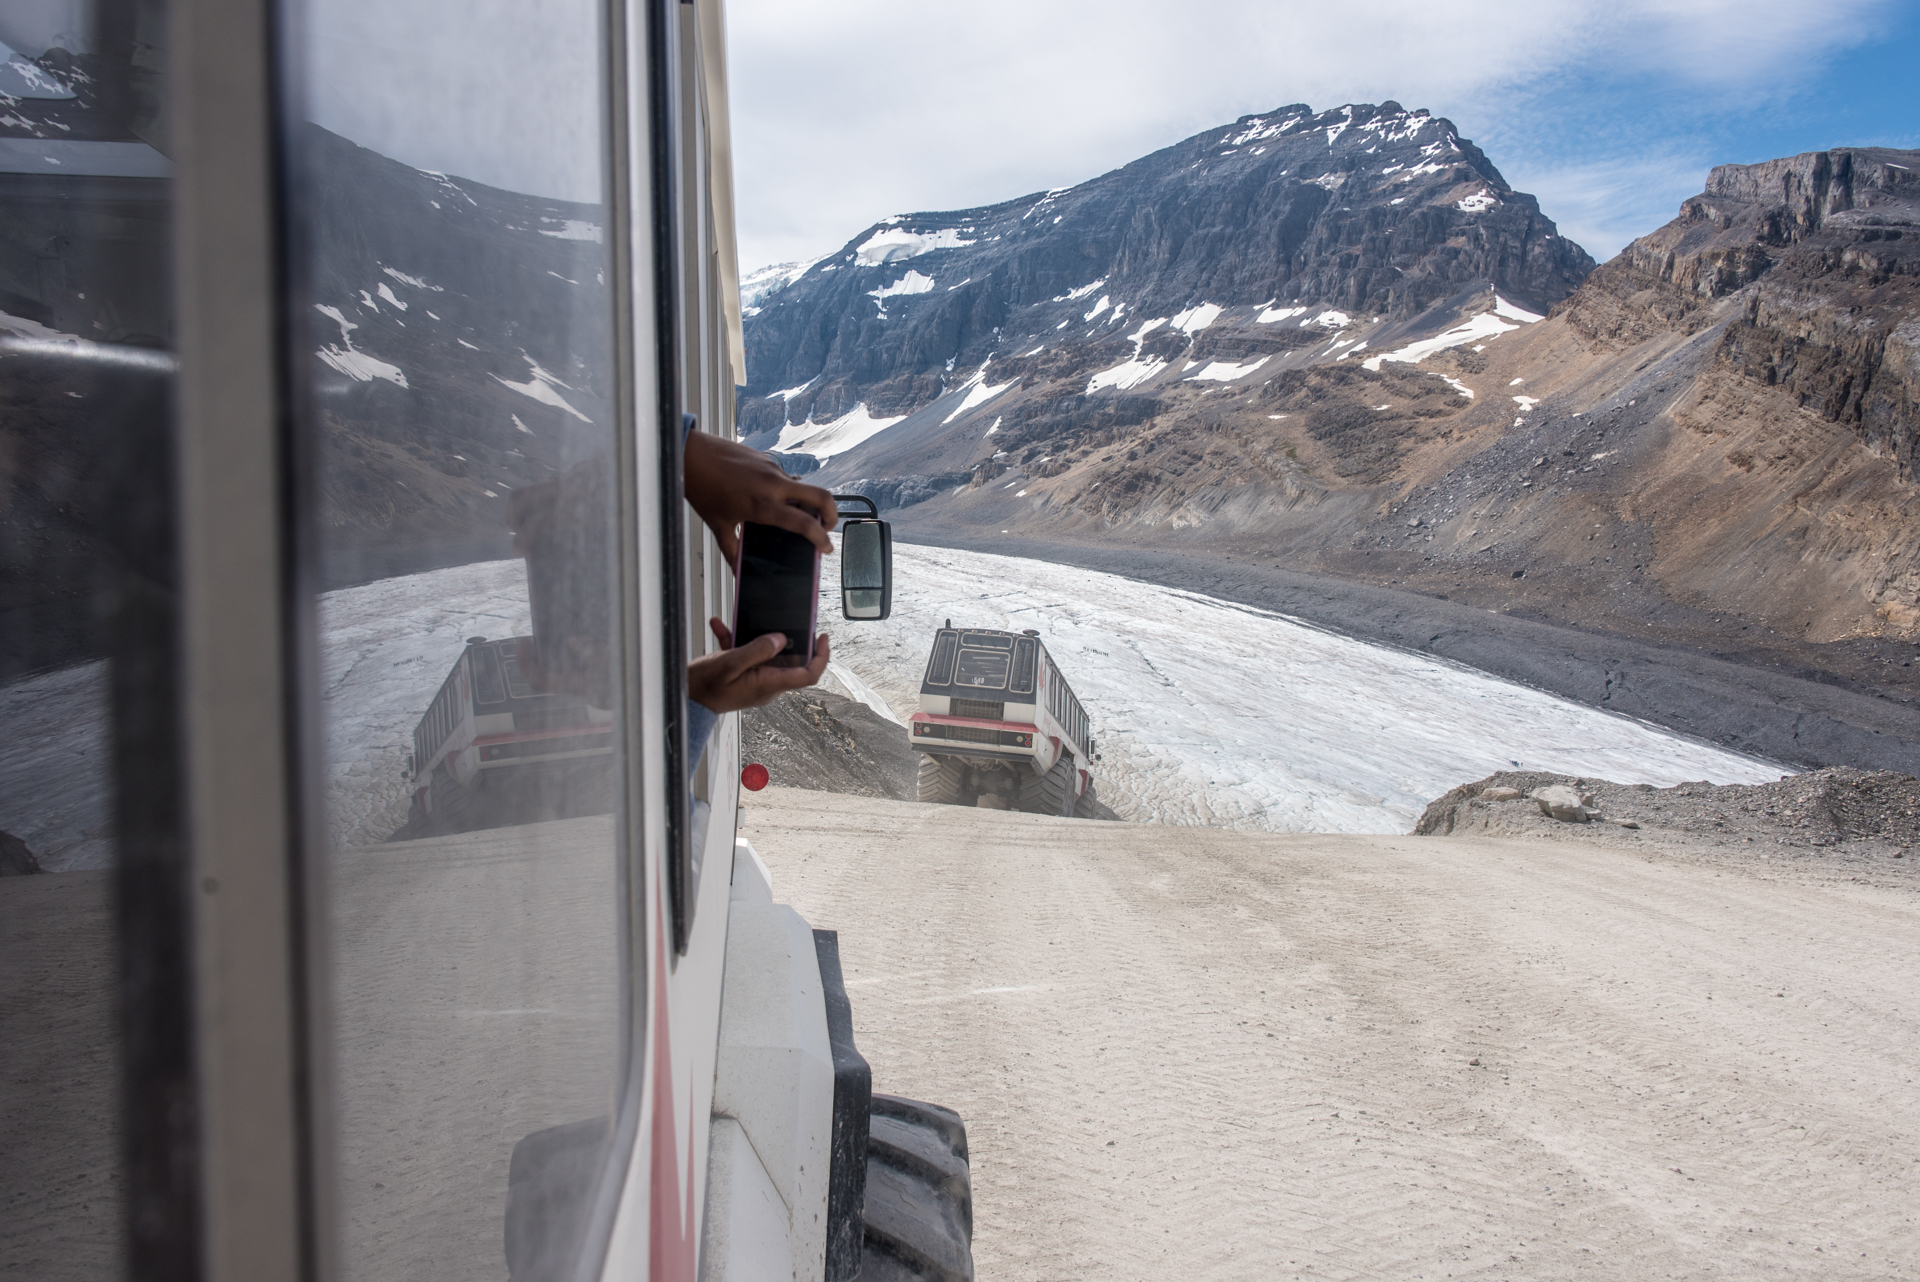 From the Glacier Terminal each 20 minutes a shuttle bus brings people to a special 4x4 glacier bus that contains up to 30 persons.  One after the other the 4x4 vehicles slowly move toward the icefield while an enthusiastic bus driver exposes all his knowledge about glaciers.